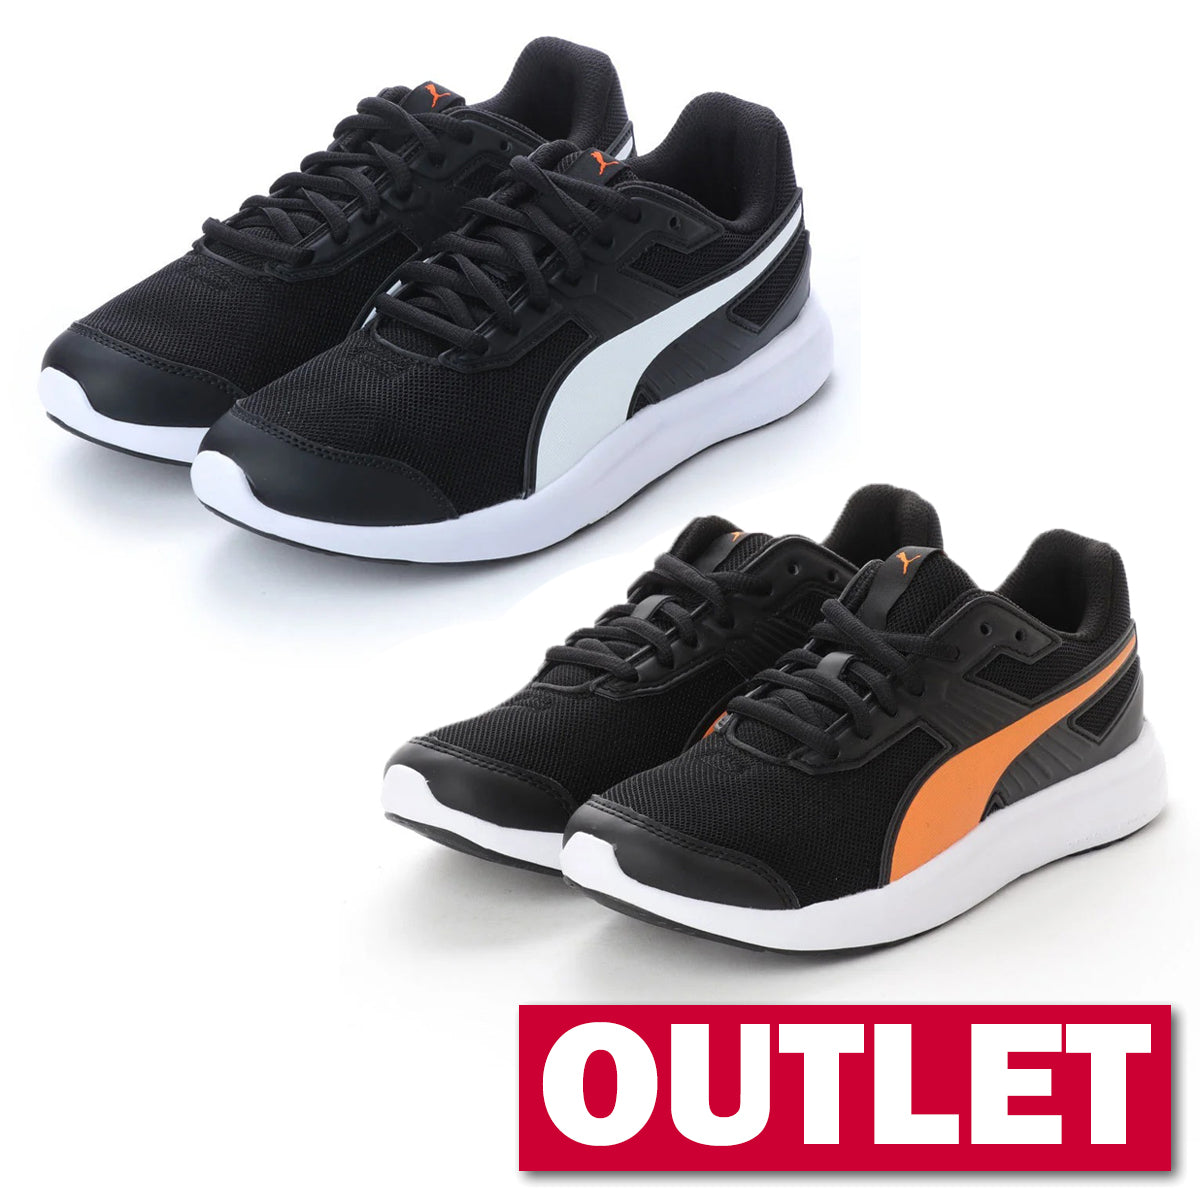 OUTLET 子供服・キッズ用品